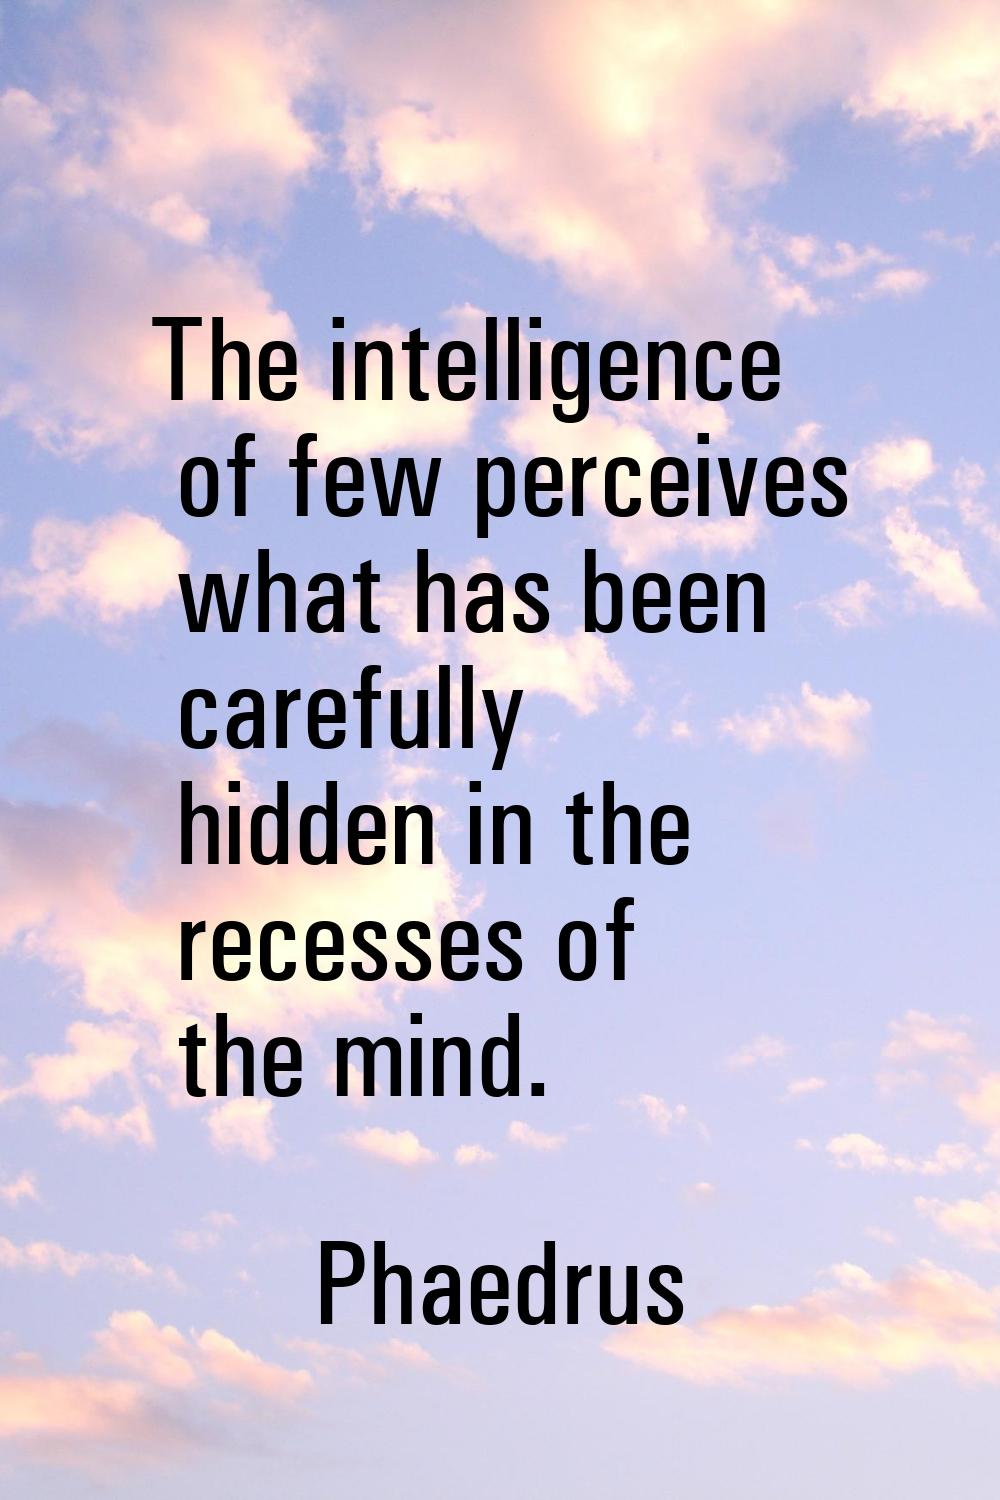 The intelligence of few perceives what has been carefully hidden in the recesses of the mind.